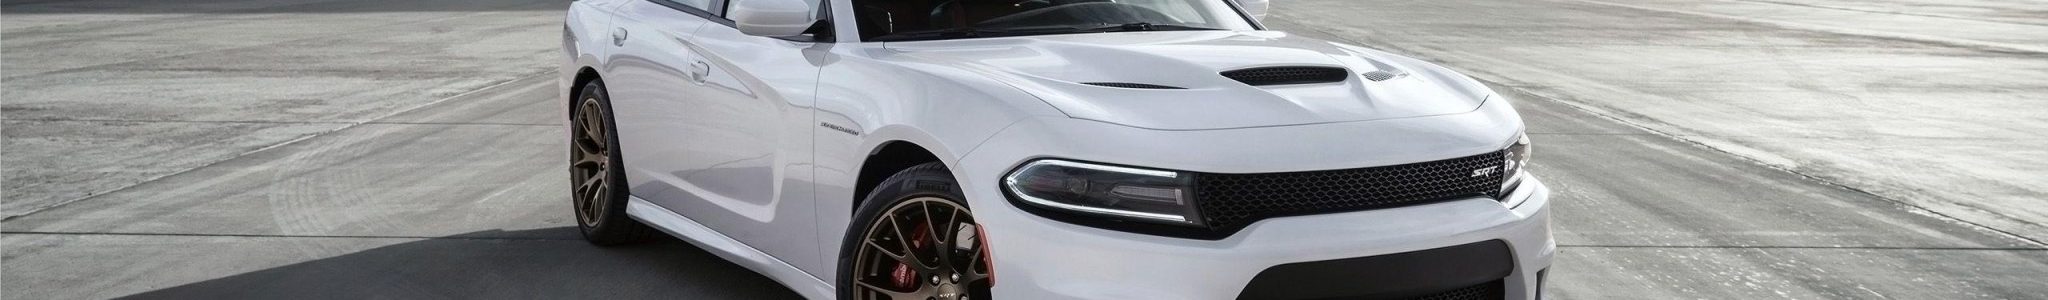 2015_charger_hellcat_banner